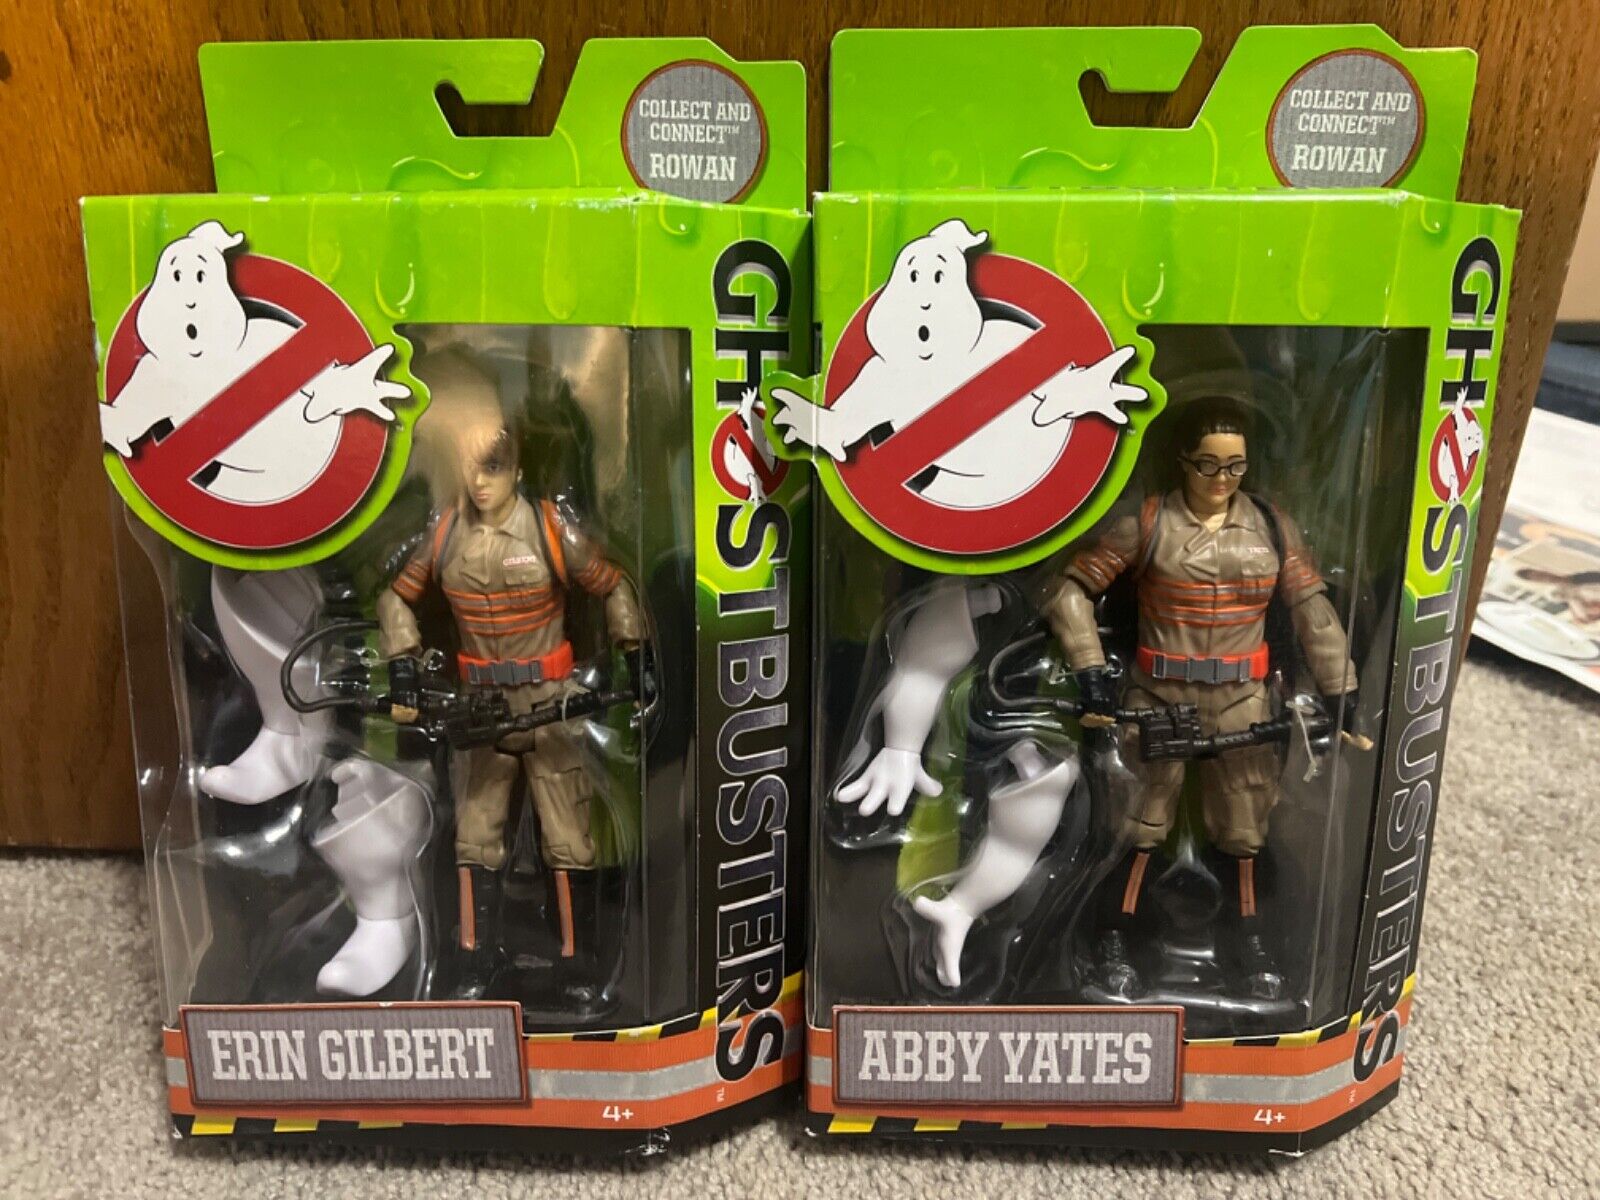 Ghostbusters 2016 action figure toy lot Erin Gilbert Abby Yates mint in box